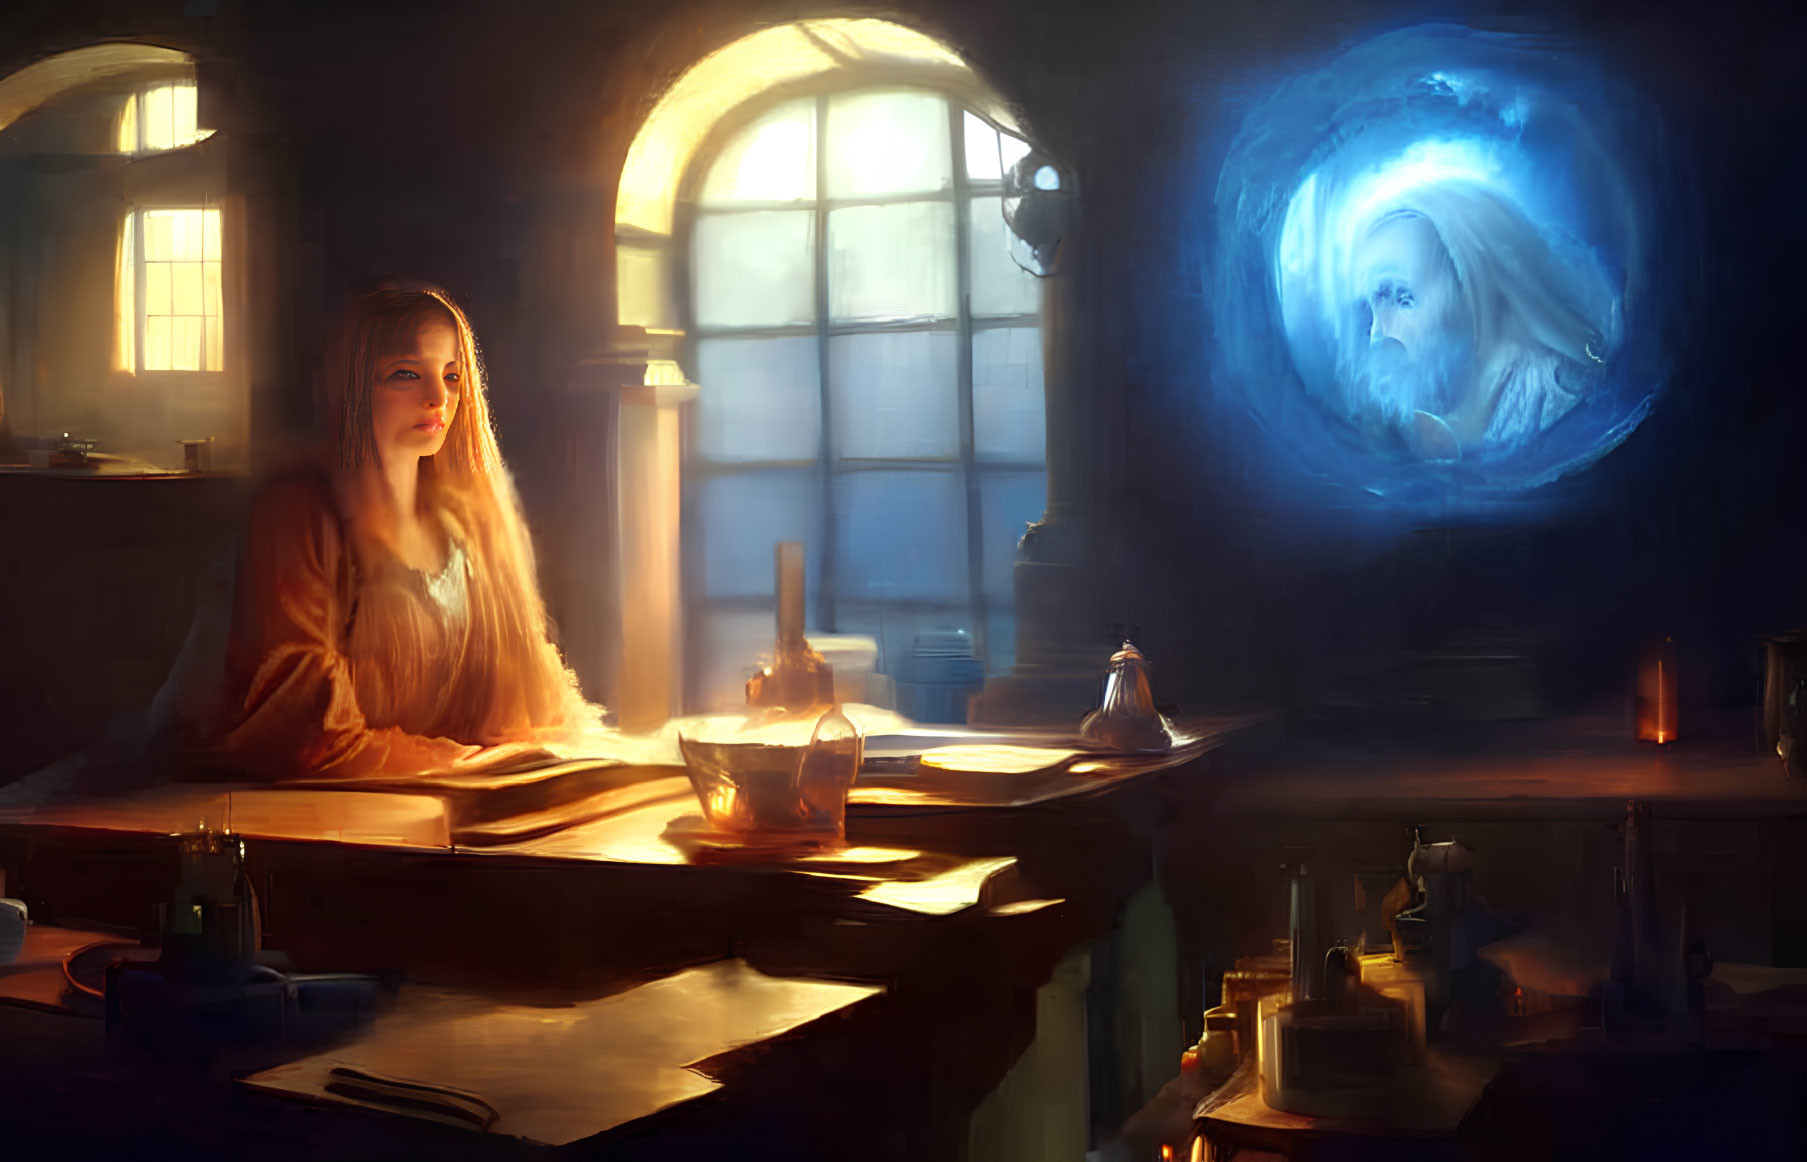 Woman at desk with books, quill, ink, gazing at swirling lion portal